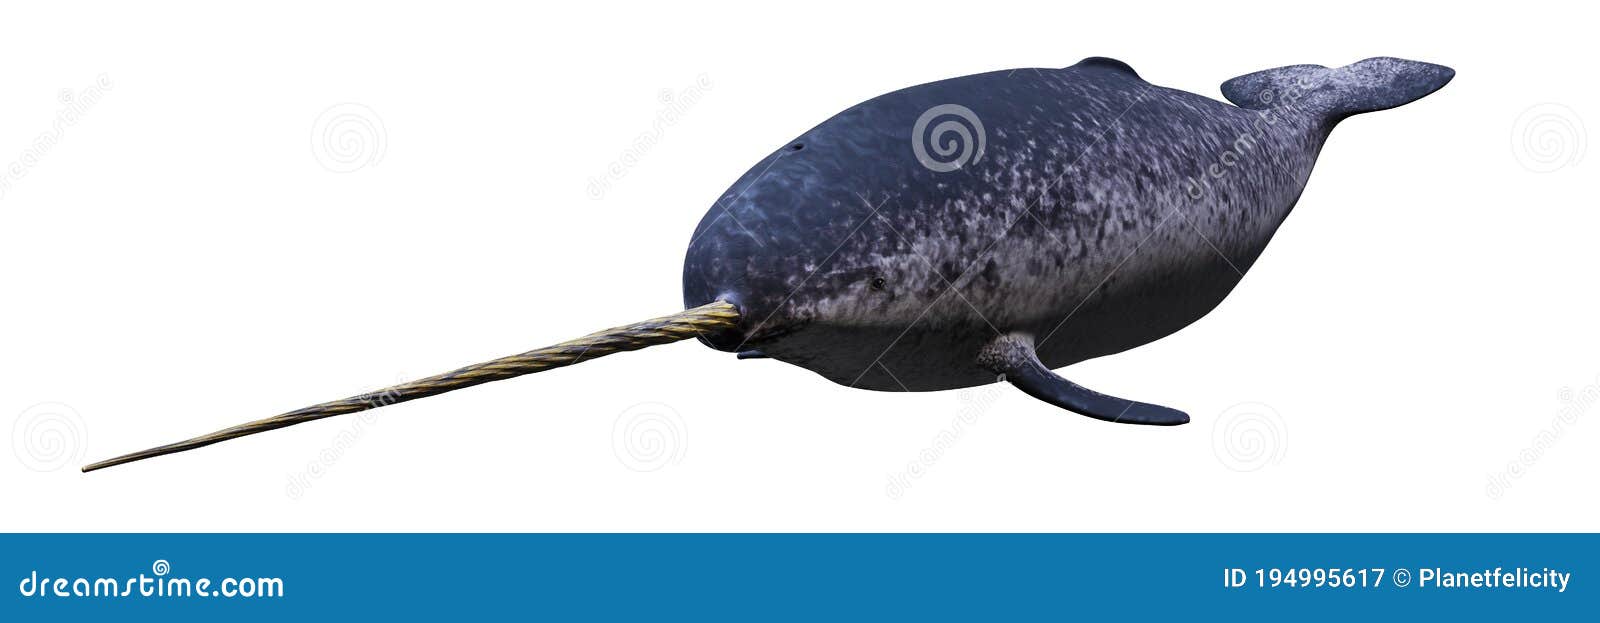 narwhal, swimming male monodon monoceros  on white background